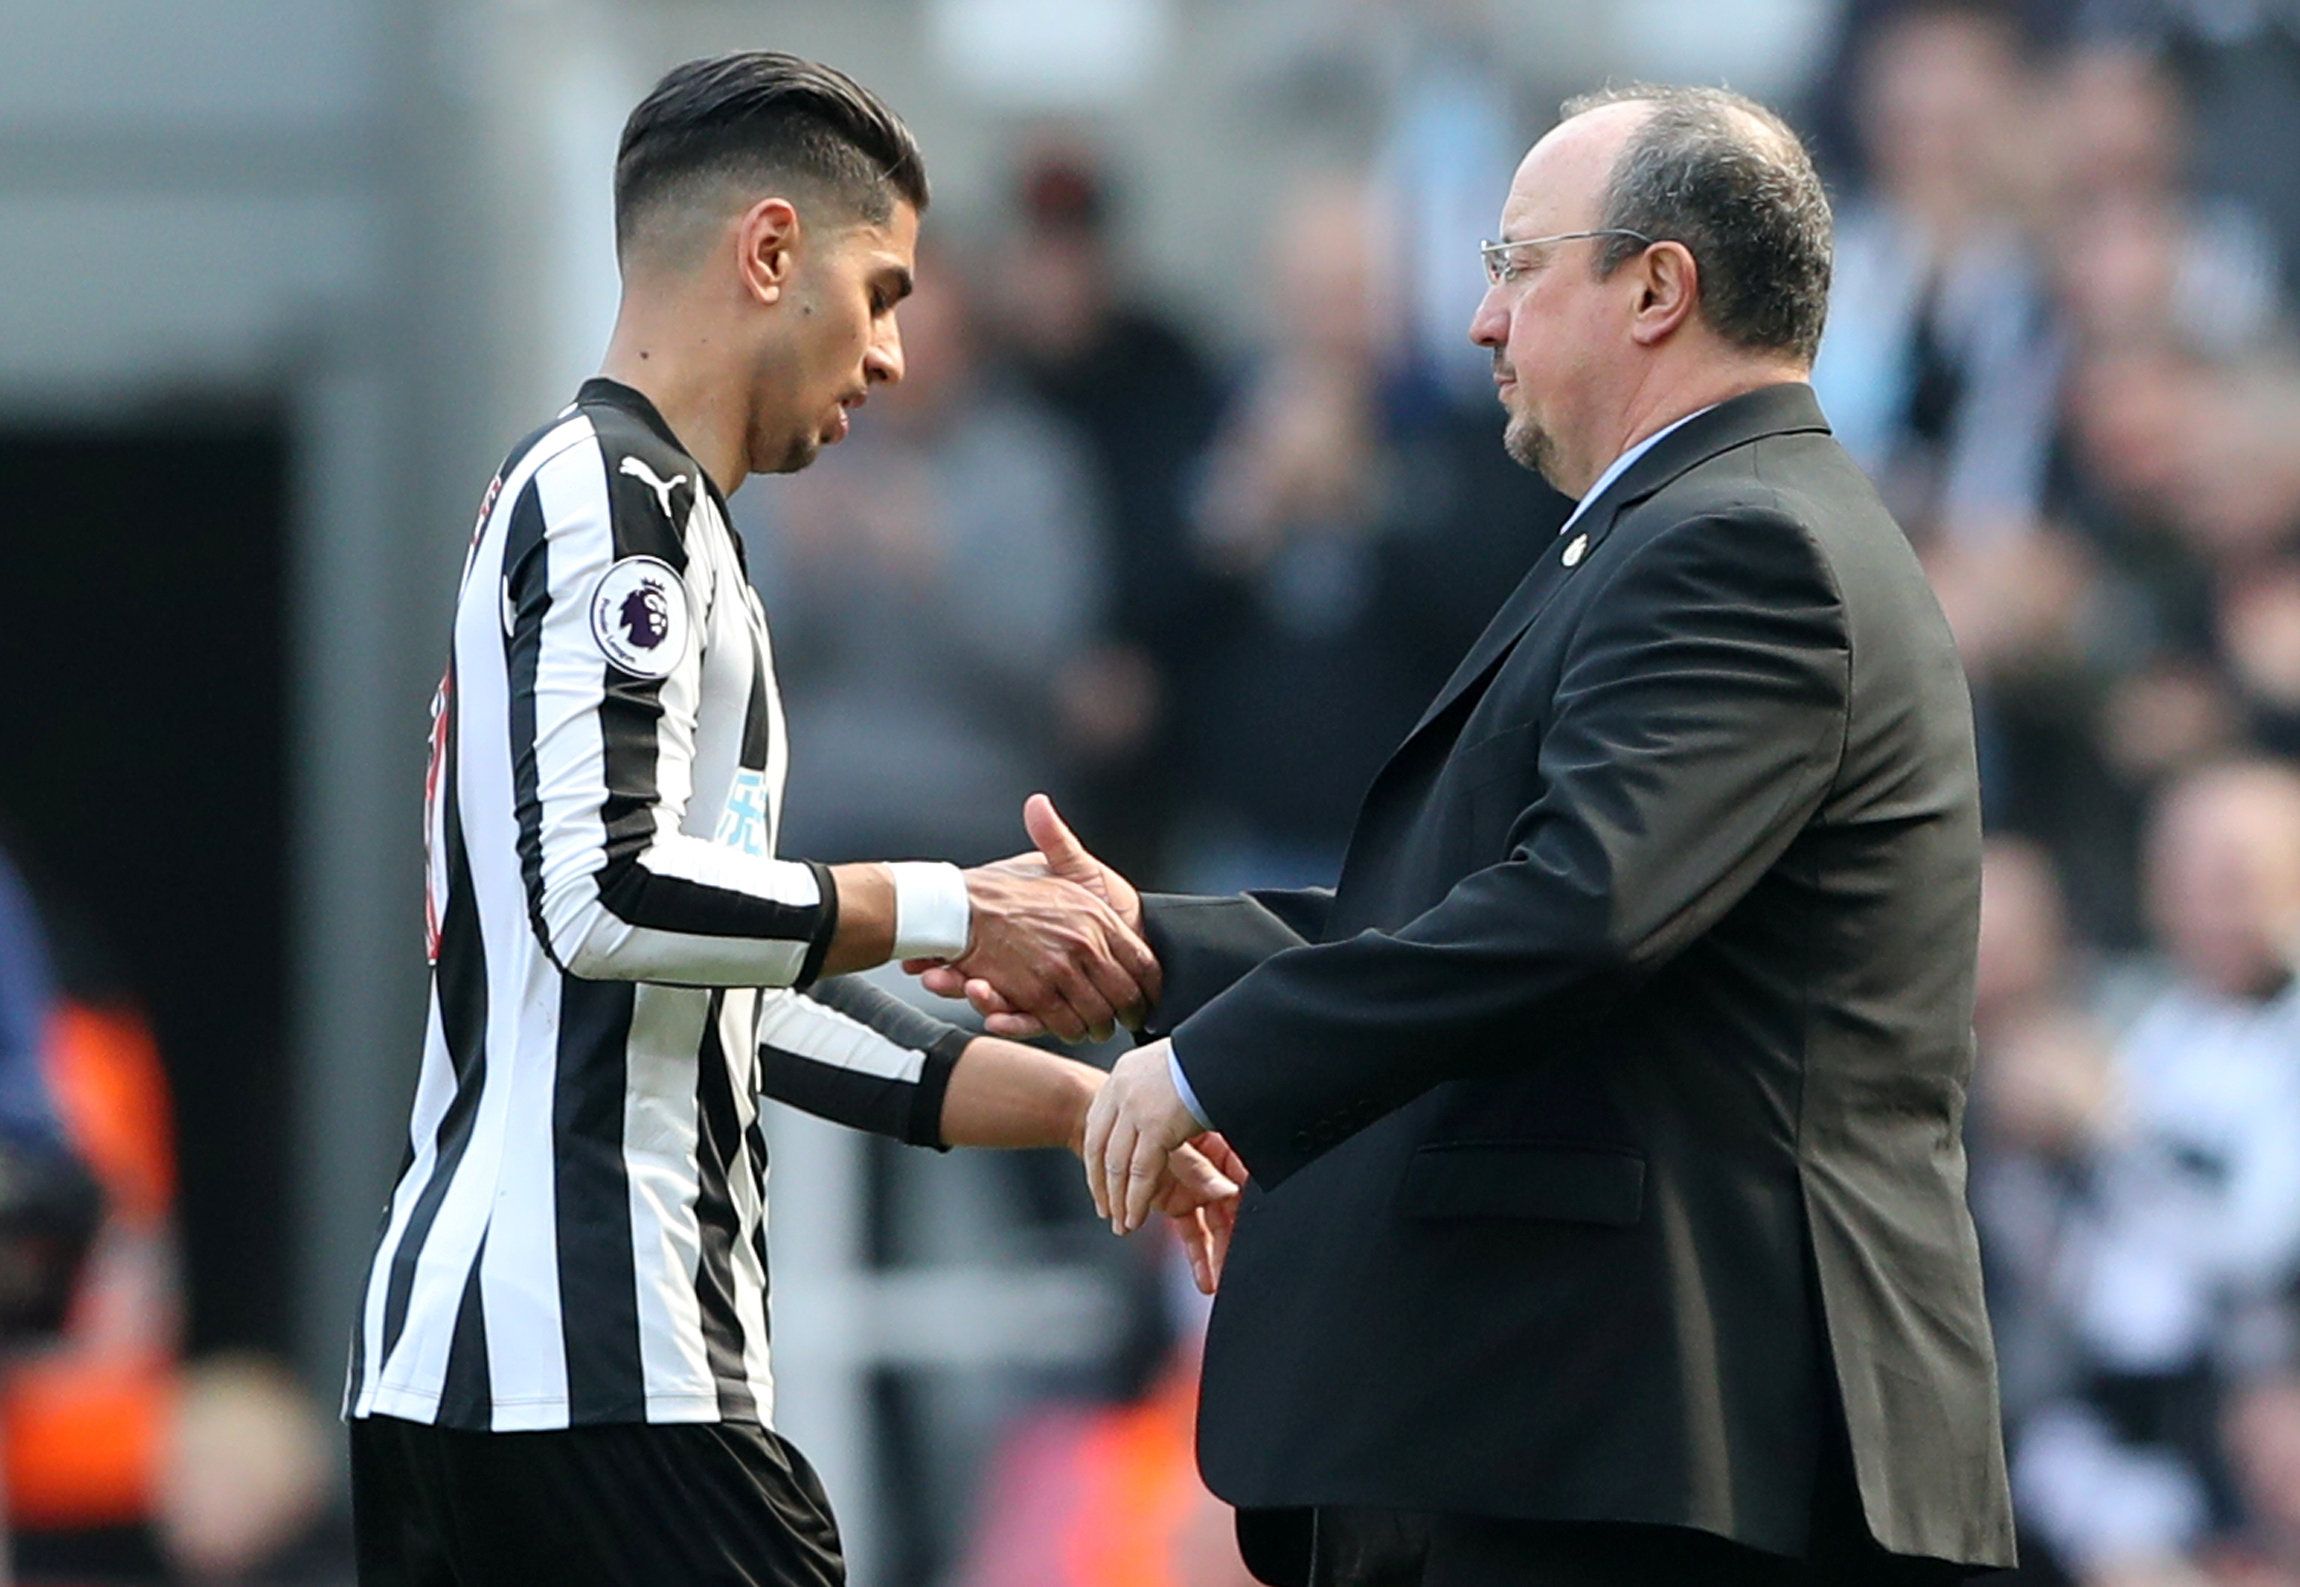 Soccer Football - Premier League - Newcastle United vs Arsenal - St James' Park, Newcastle, Britain - April 15, 2018   Newcastle United's Ayoze Perez is substituted off as Newcastle United manager Rafael Benitez looks on        REUTERS/Scott Heppell    EDITORIAL USE ONLY. No use with unauthorized audio, video, data, fixture lists, club/league logos or "live" services. Online in-match use limited to 75 images, no video emulation. No use in betting, games or single club/league/player publications.